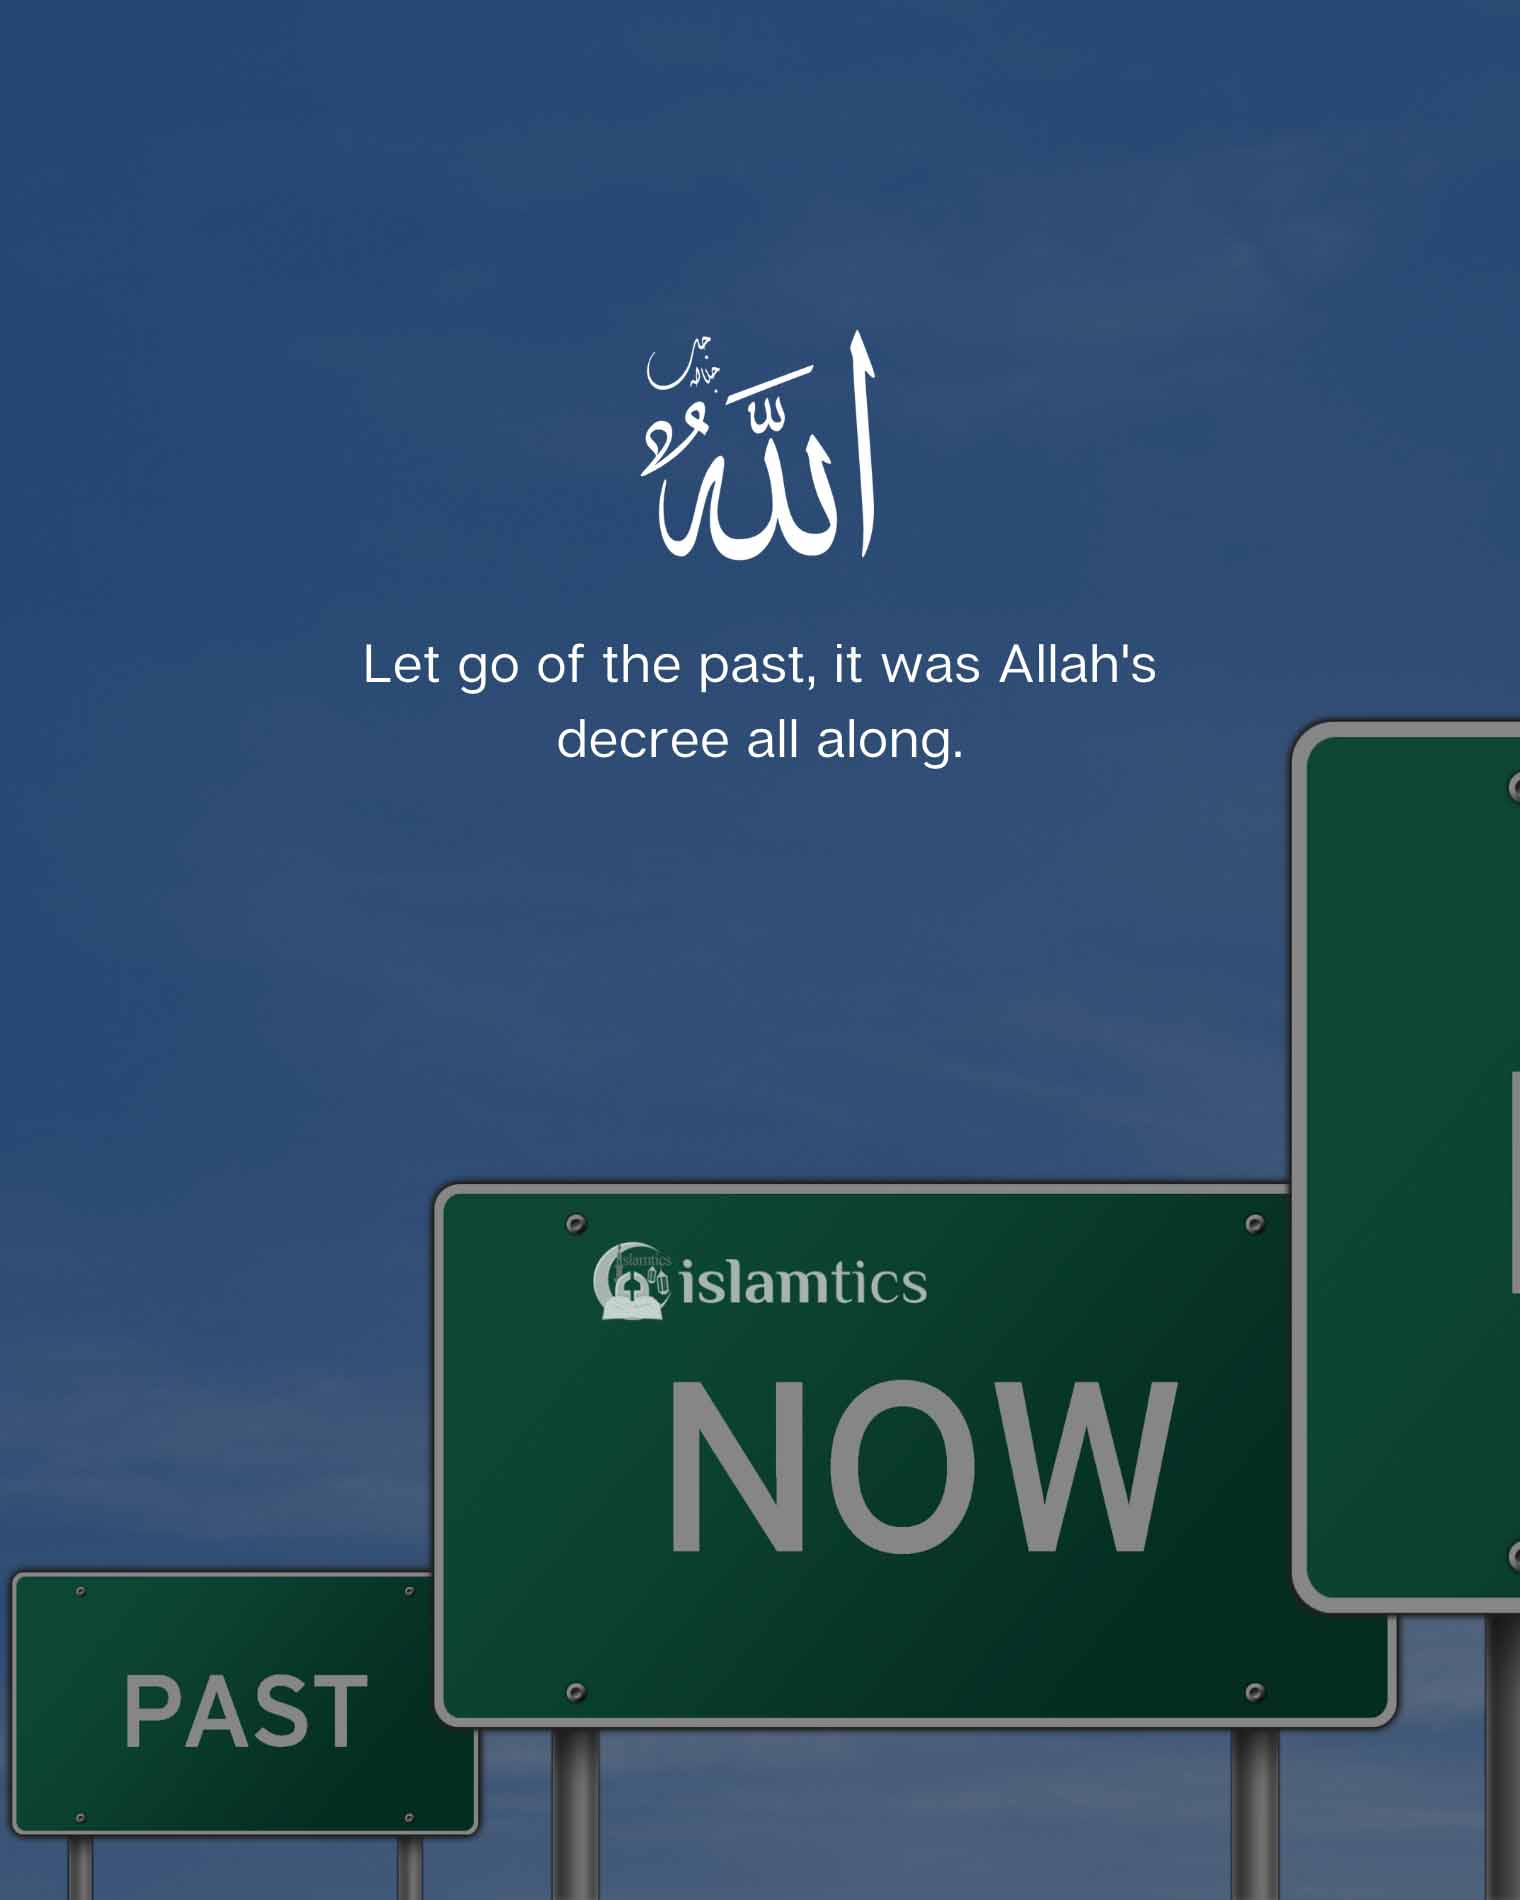  Let go of the past, it was Allah’s decree all along.